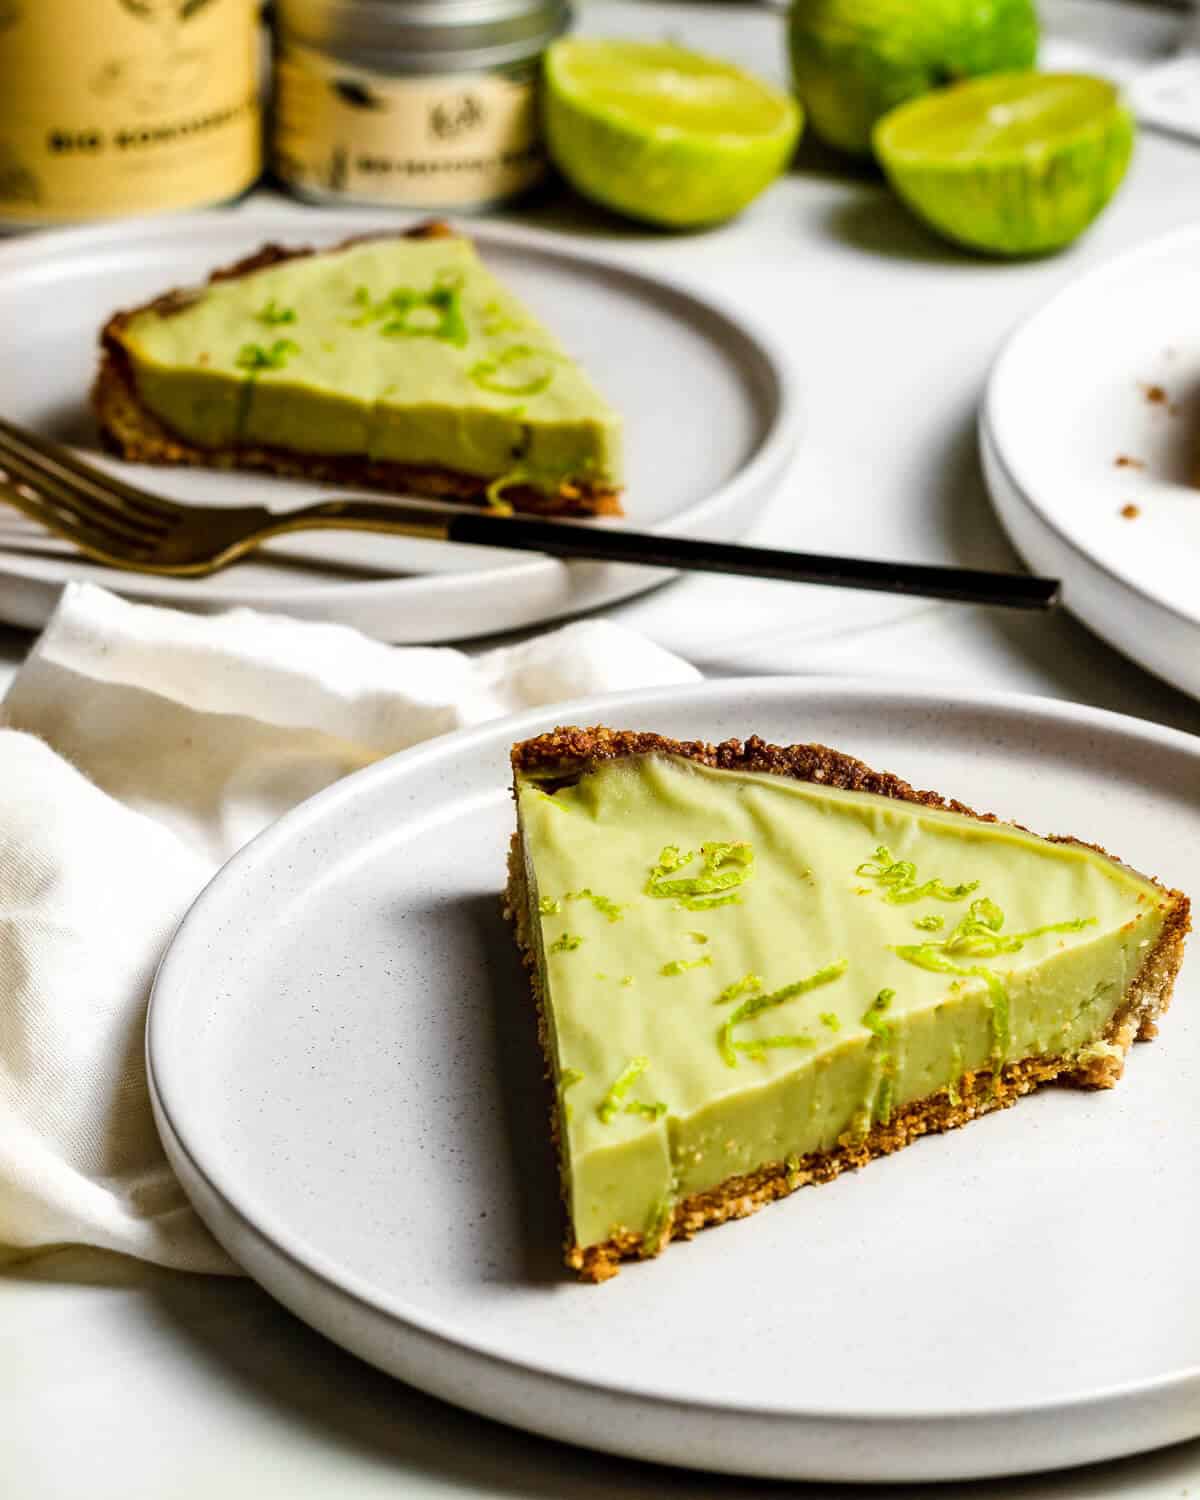 Two plates with a slice of vegan key lime pie on each. There is a fork on the plate in the top left corner. In the background are some limes, coconut milk and matcha.